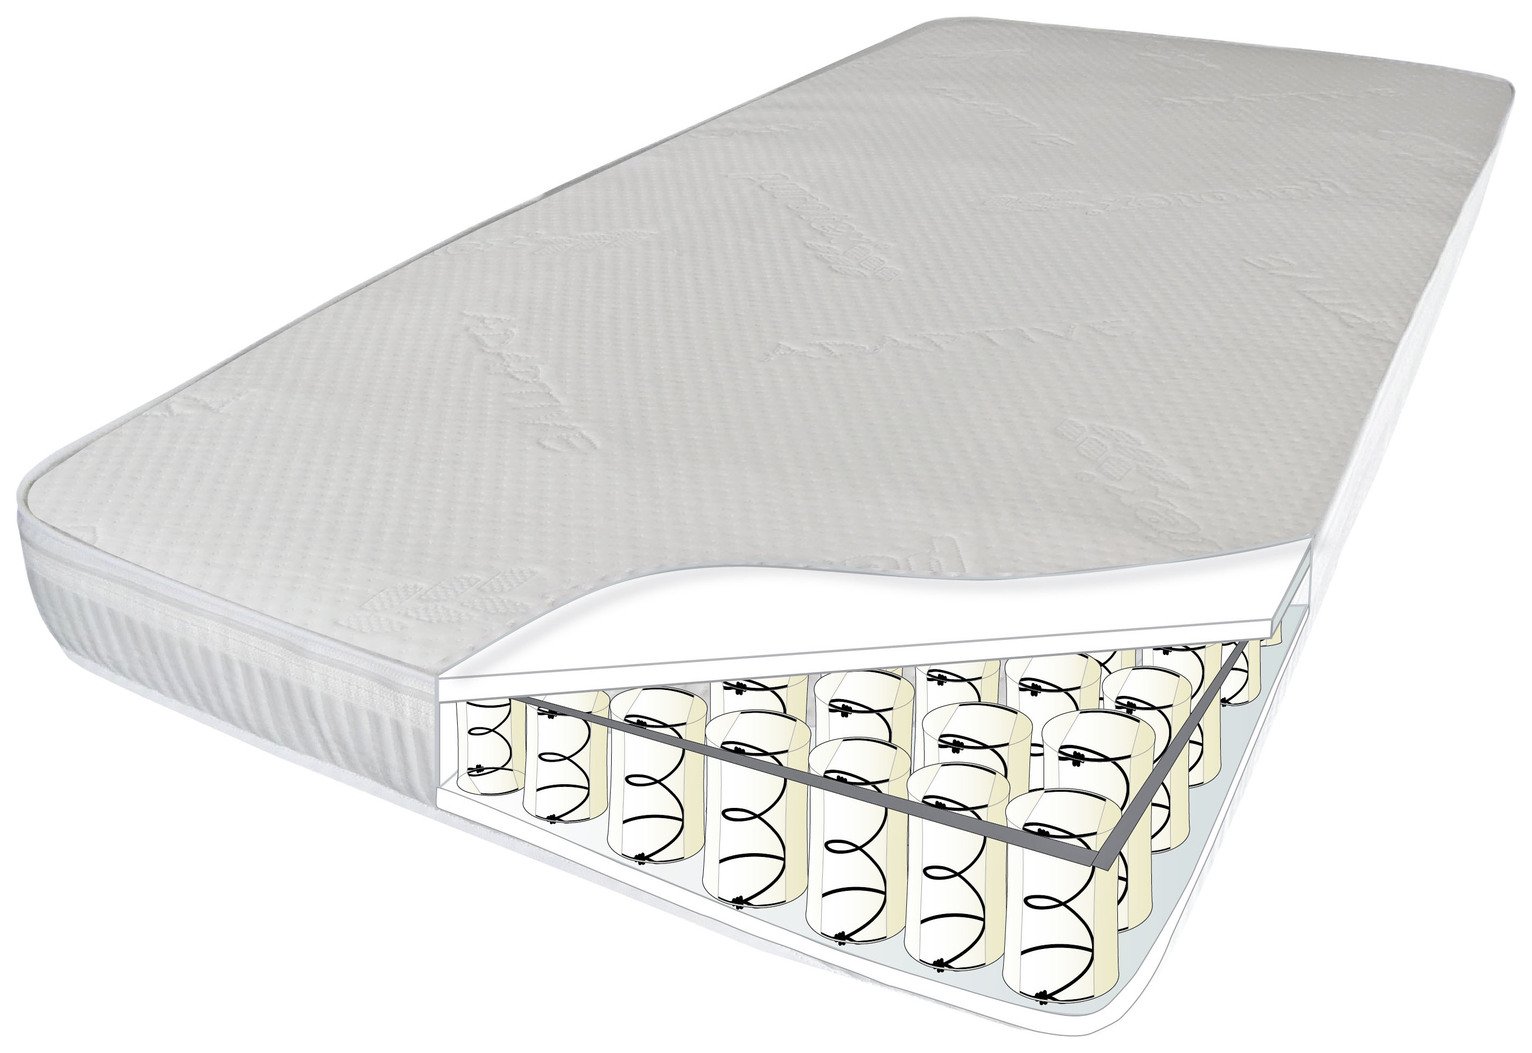 Cuggl 140 x 70cm Thermo Pocket Sprung Cot Bed Mattress Review